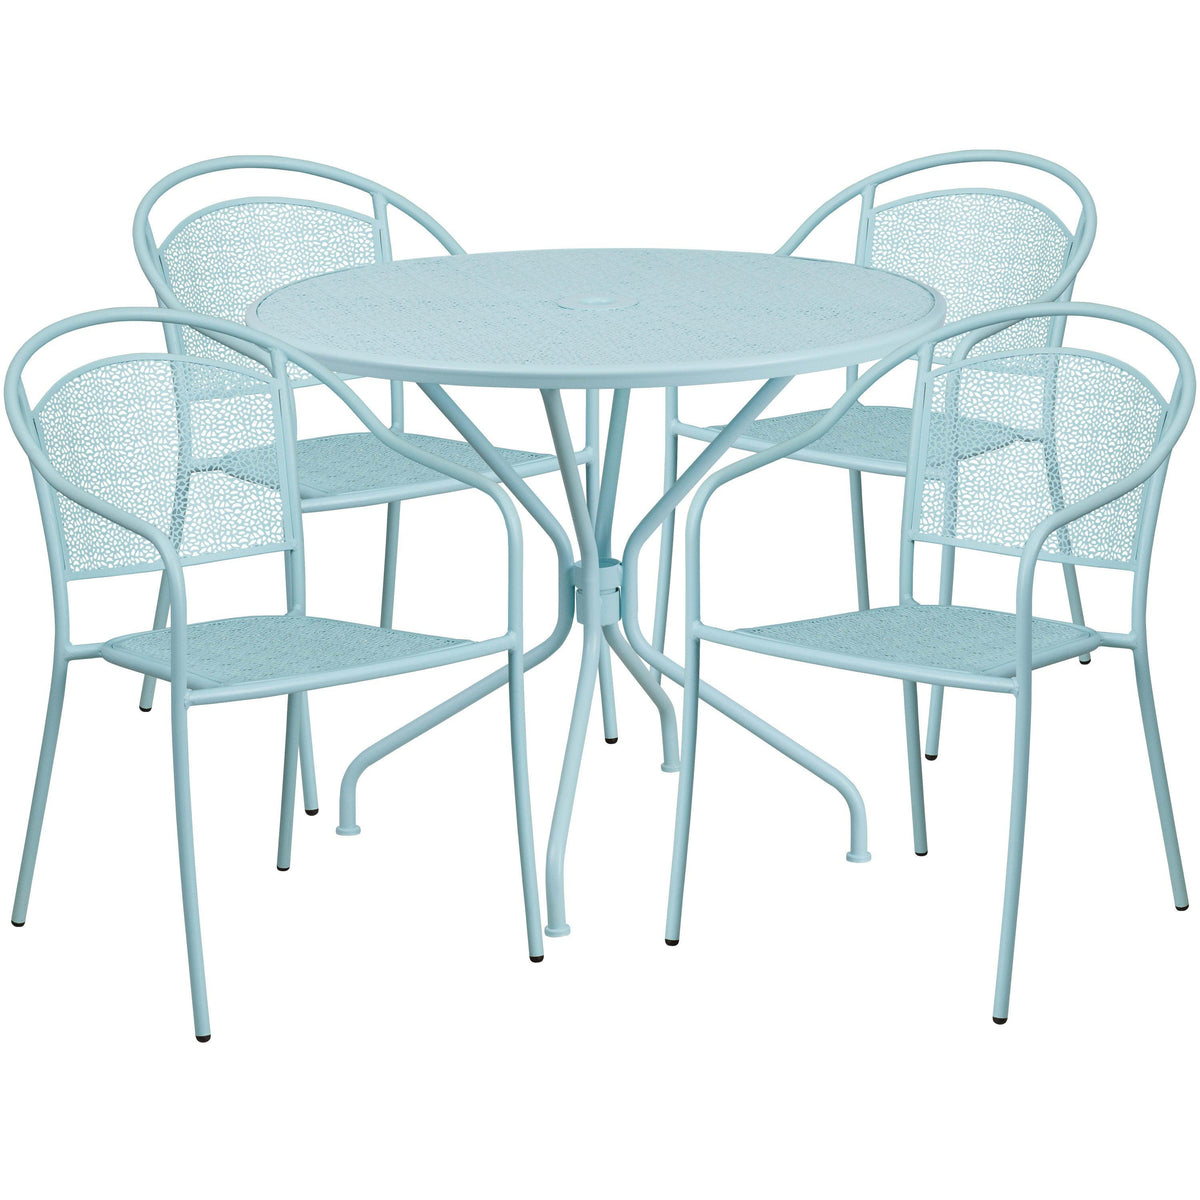 Sky Blue |#| 35.25inch RD Sky Blue Indoor-Outdoor Steel Patio Table Set with 4 Round Back Chairs